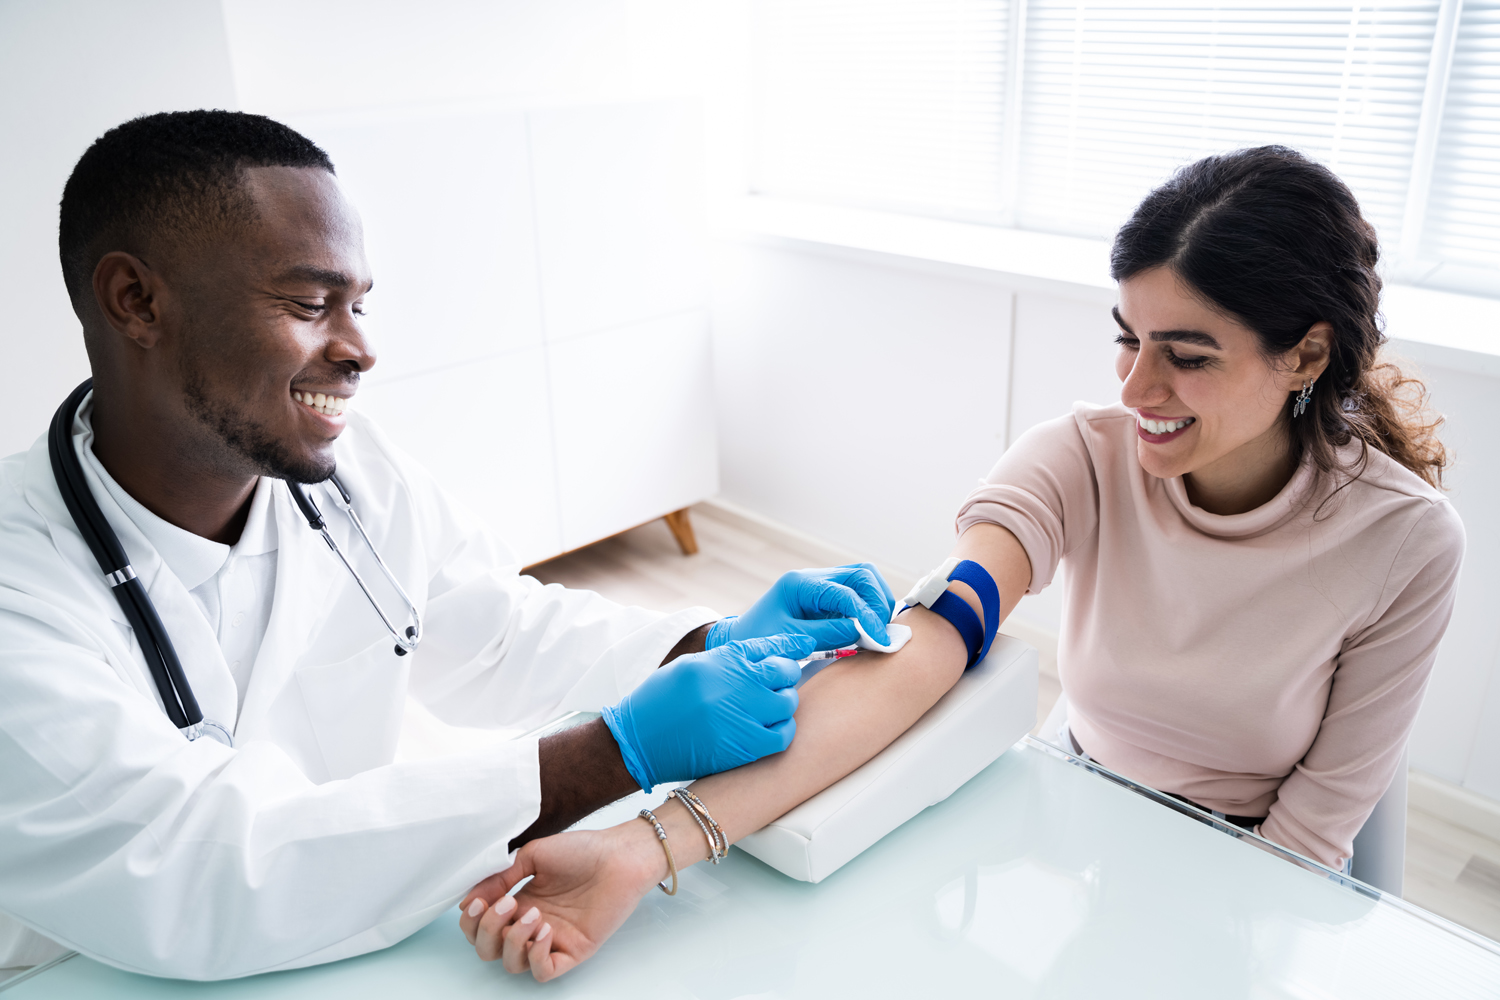 A male doctor performs a blood draw on a female patient.